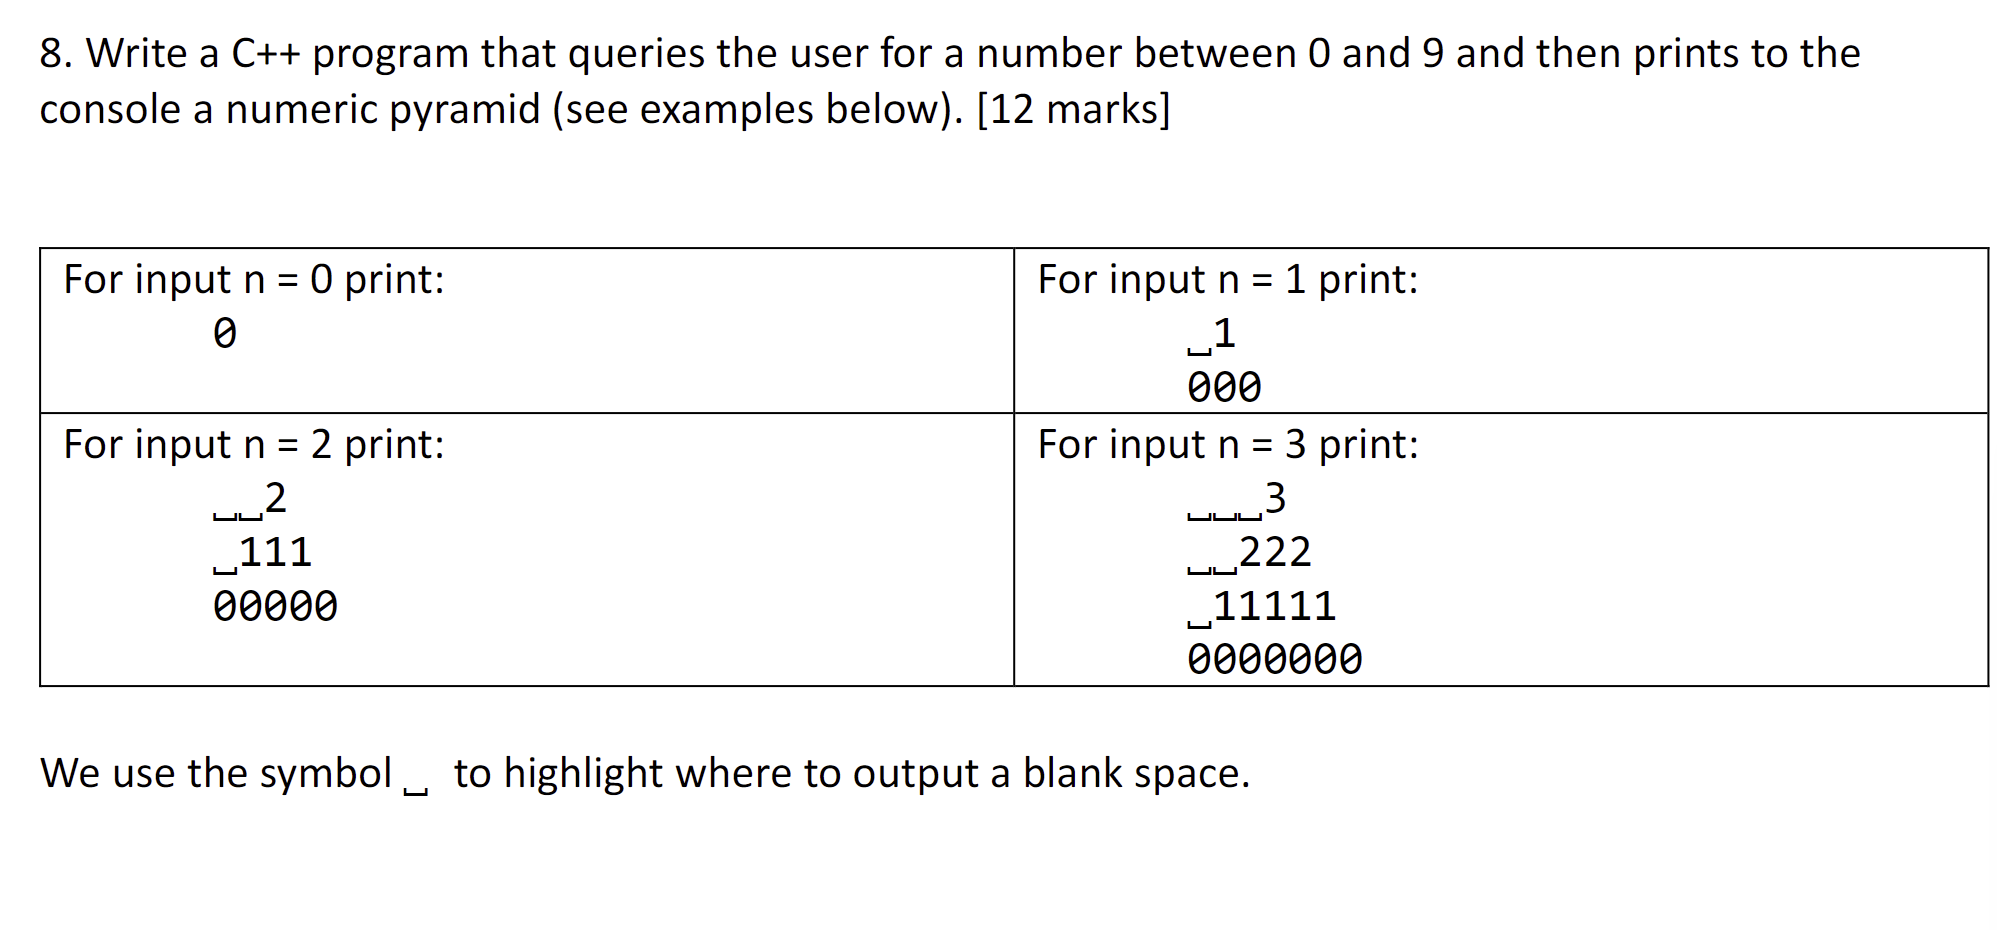 8. Write a C++ program that queries the user for a number between 0 and 9 and then prints to the console a